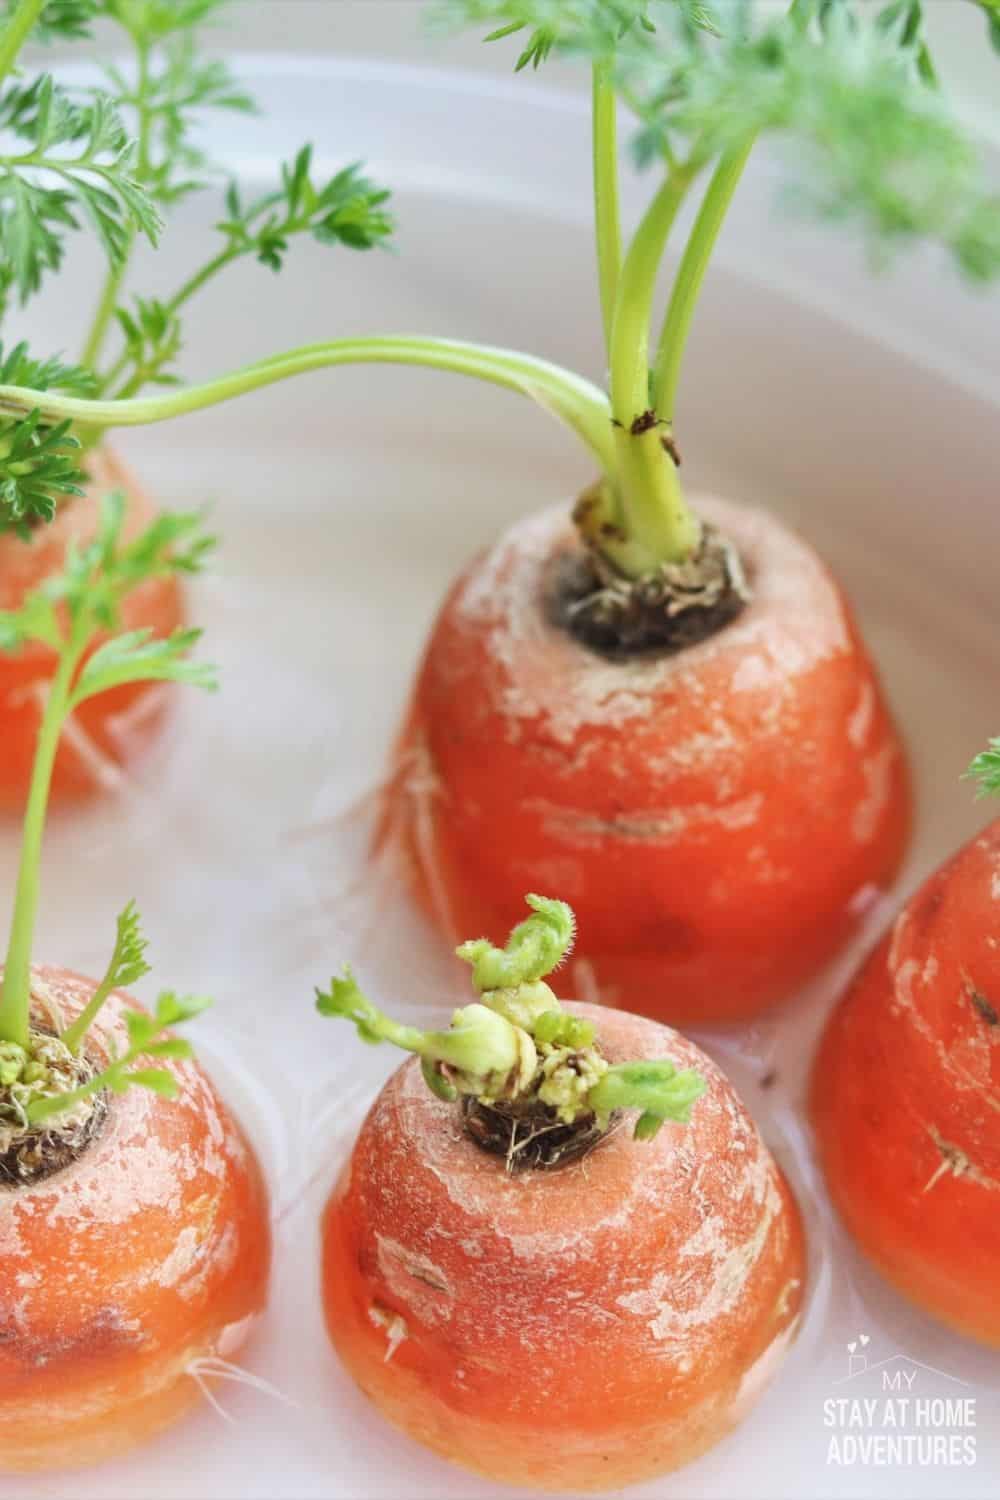 Don't get rid of that carrot. Regrow it! Learn how to regrow a carrot from scrap and indoor with your kids by following these steps. via @mystayathome